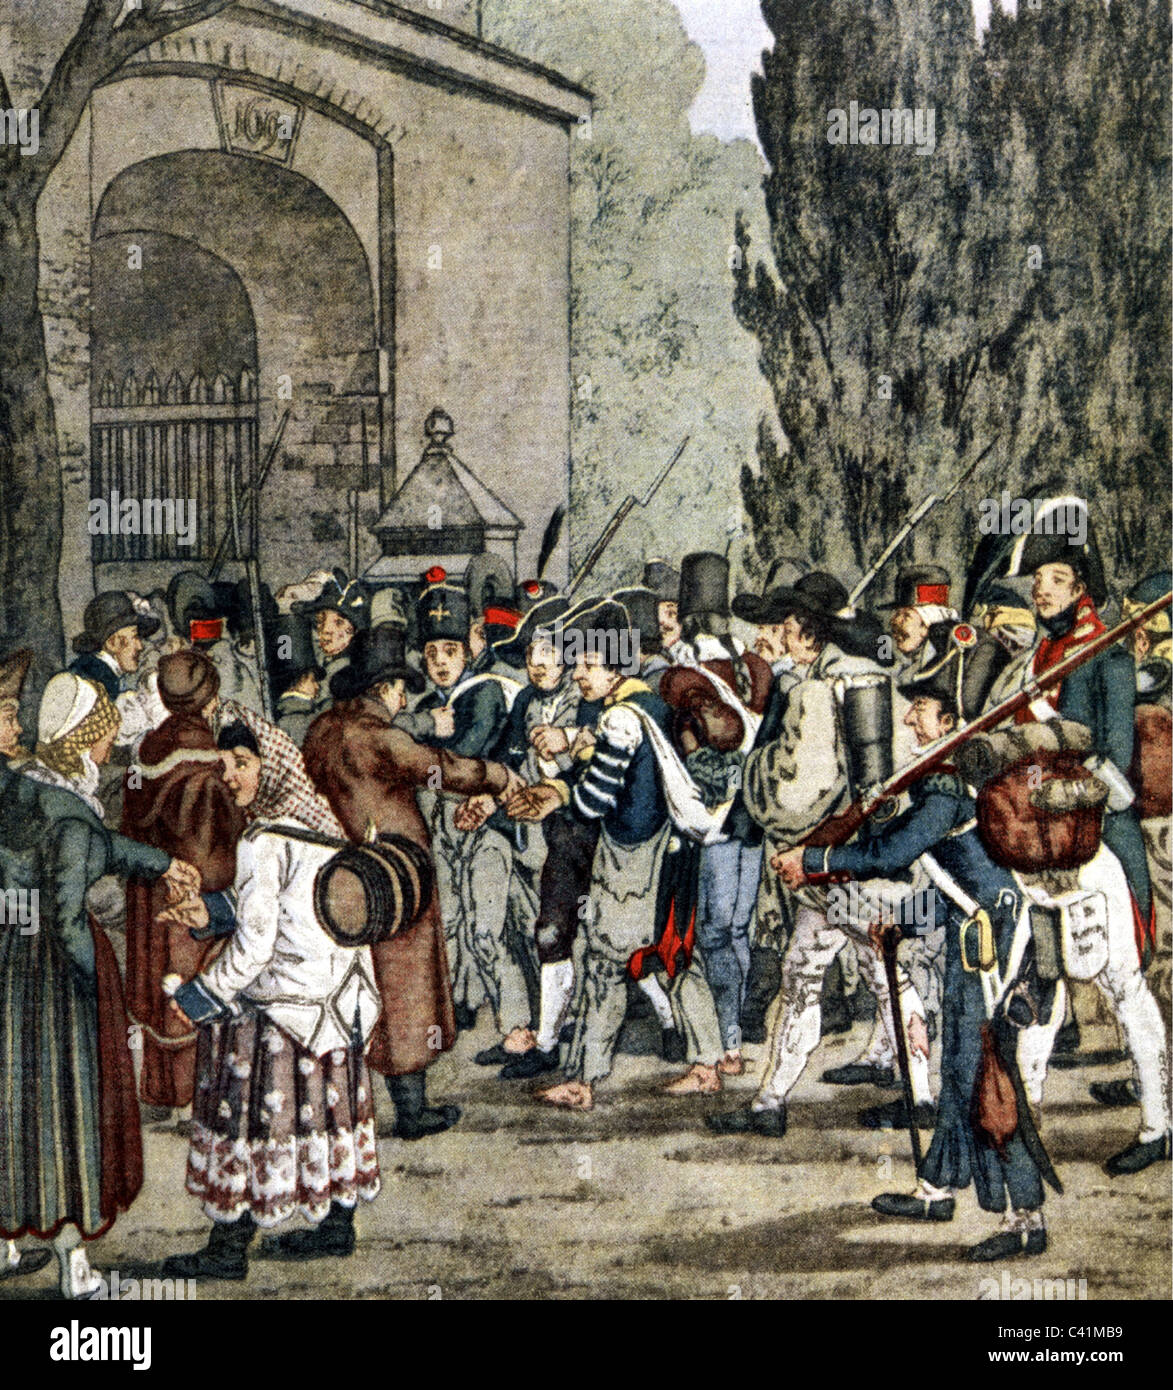 events, War of the Fourth Coalition 1806/1807, Prussian prisoners are brought to Leipzig by the French after the Battle of Jena-Auerstedt, October 1806, coloured copper engraving by C.G.H. Geissler, Jena, Auerstedt, Napoleonic Wars, Prussia, France, begging, defeat, historic, historical, soldiers, Saxony, uniform, military, uniforms, 19th century, people, Additional-Rights-Clearences-Not Available Stock Photo